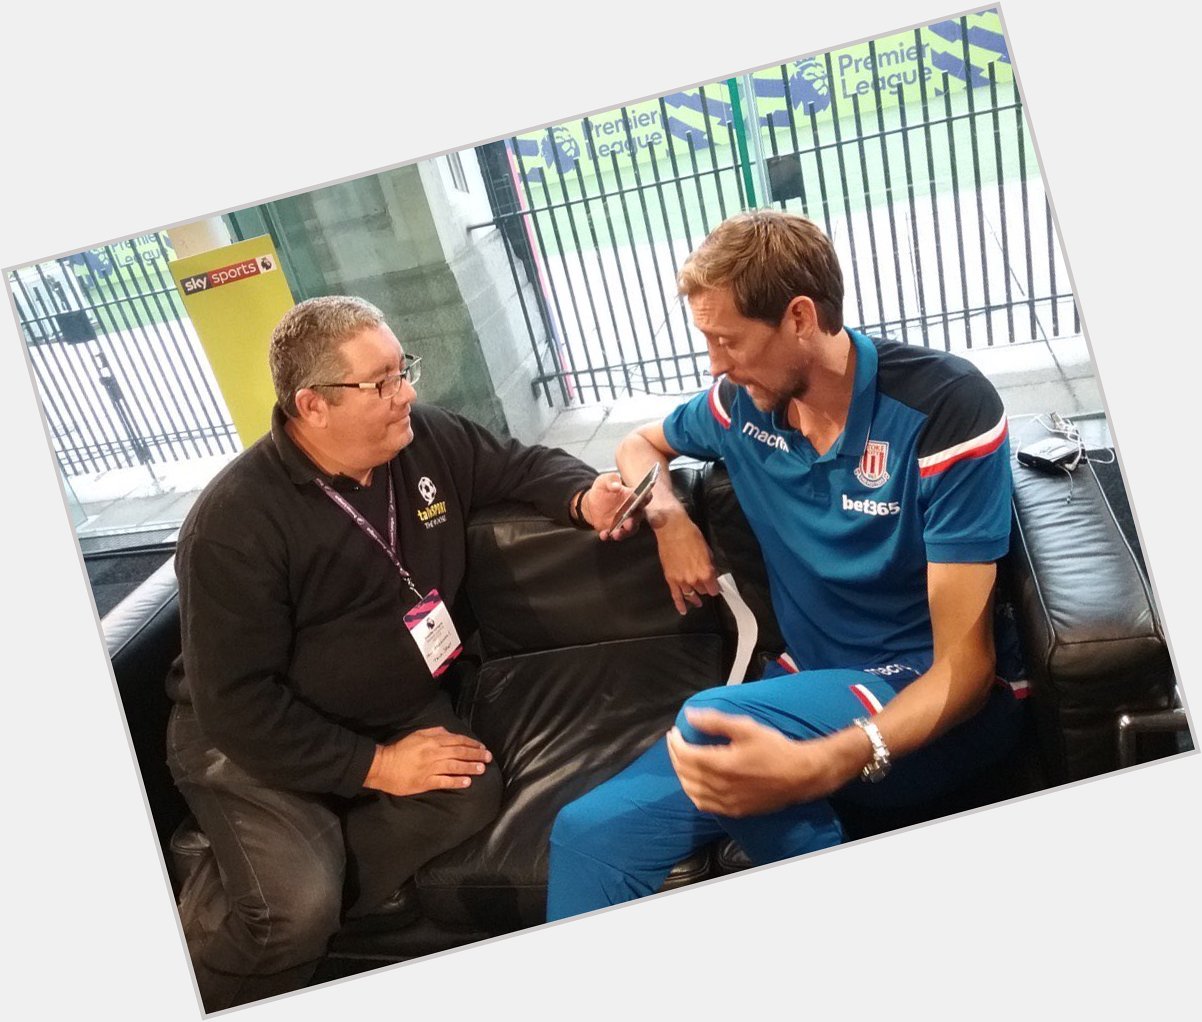 Happy 37th Birthday Peter Crouch, have a great day my friend 